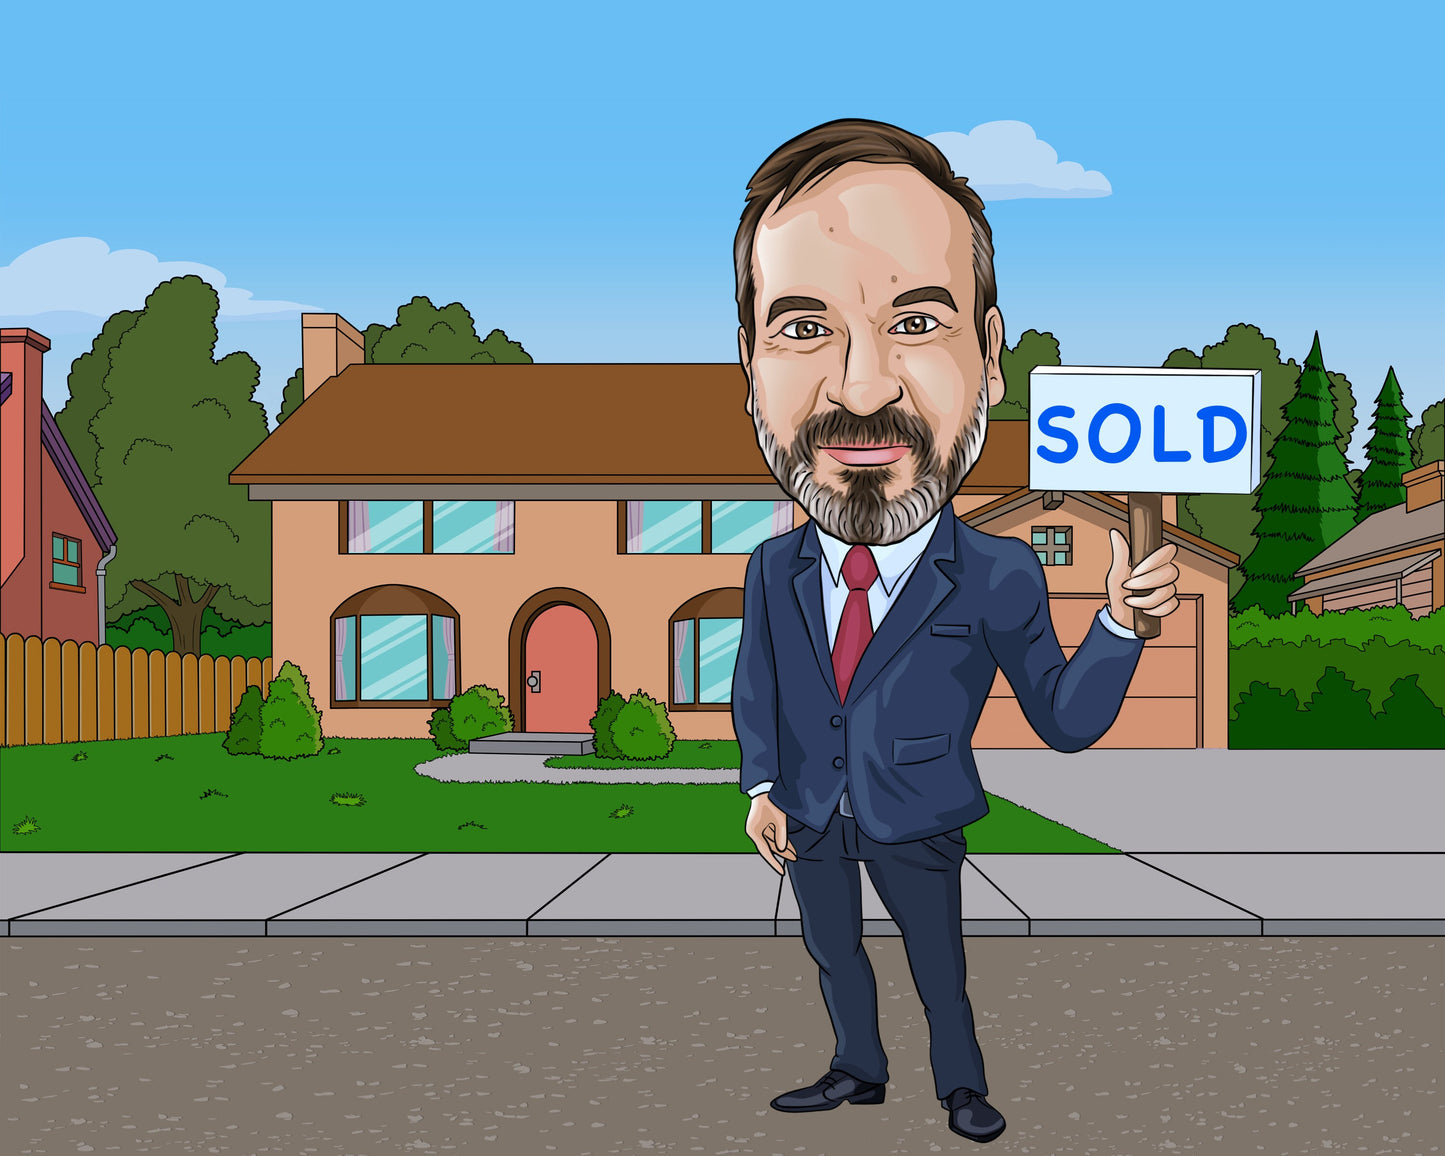 Real Estate Agent Gift - Custom Caricature Portrait From Your Photo/Real Estate broker gift